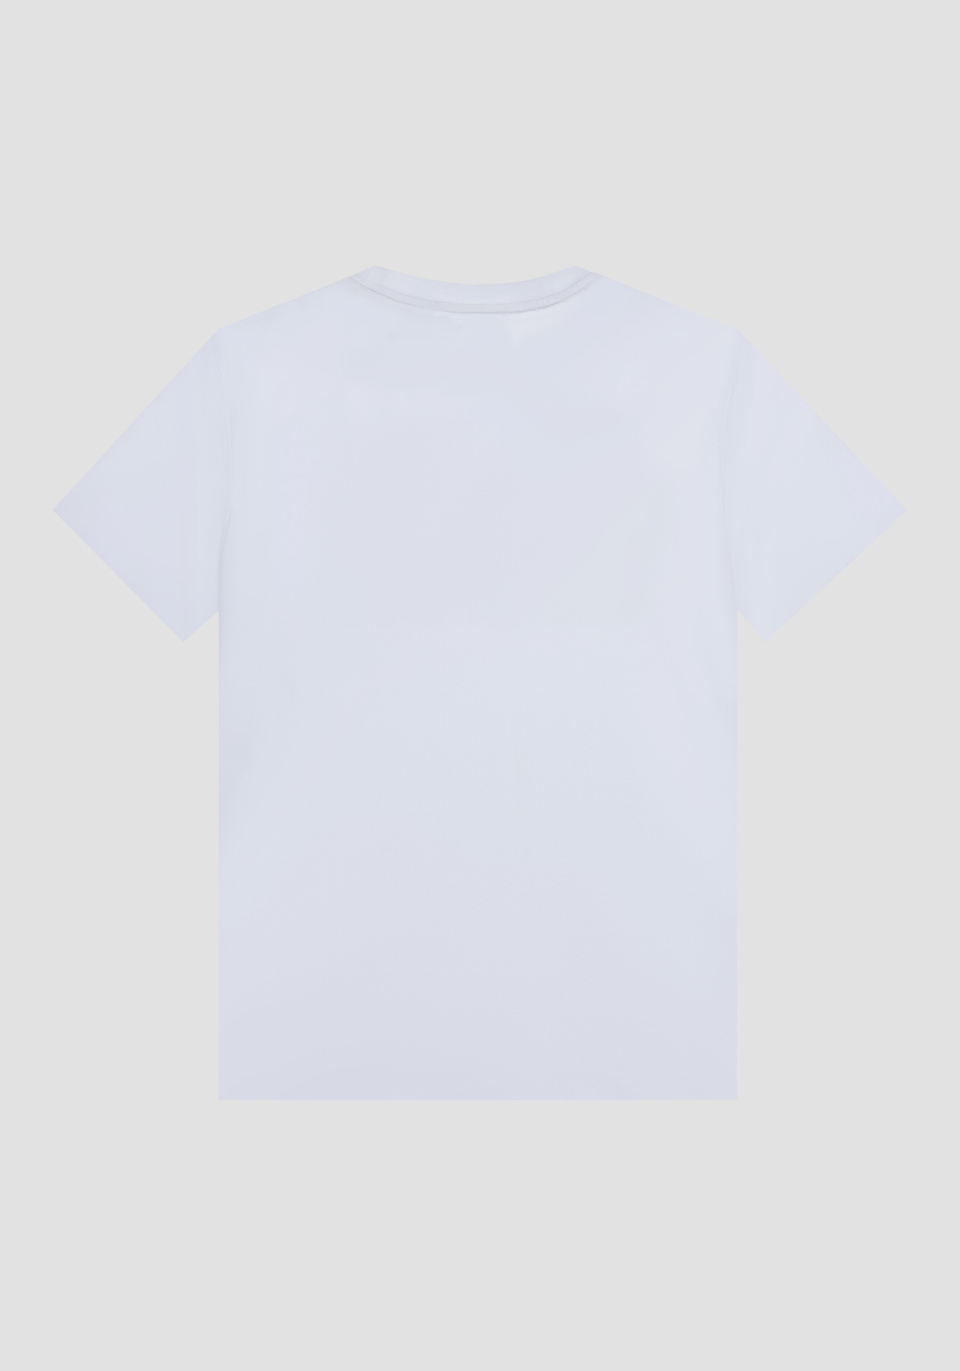 SUPER SLIM FIT T-SHIRT IN STRETCH COTTON WITH FRONT PRINT - Antony Morato Online Shop